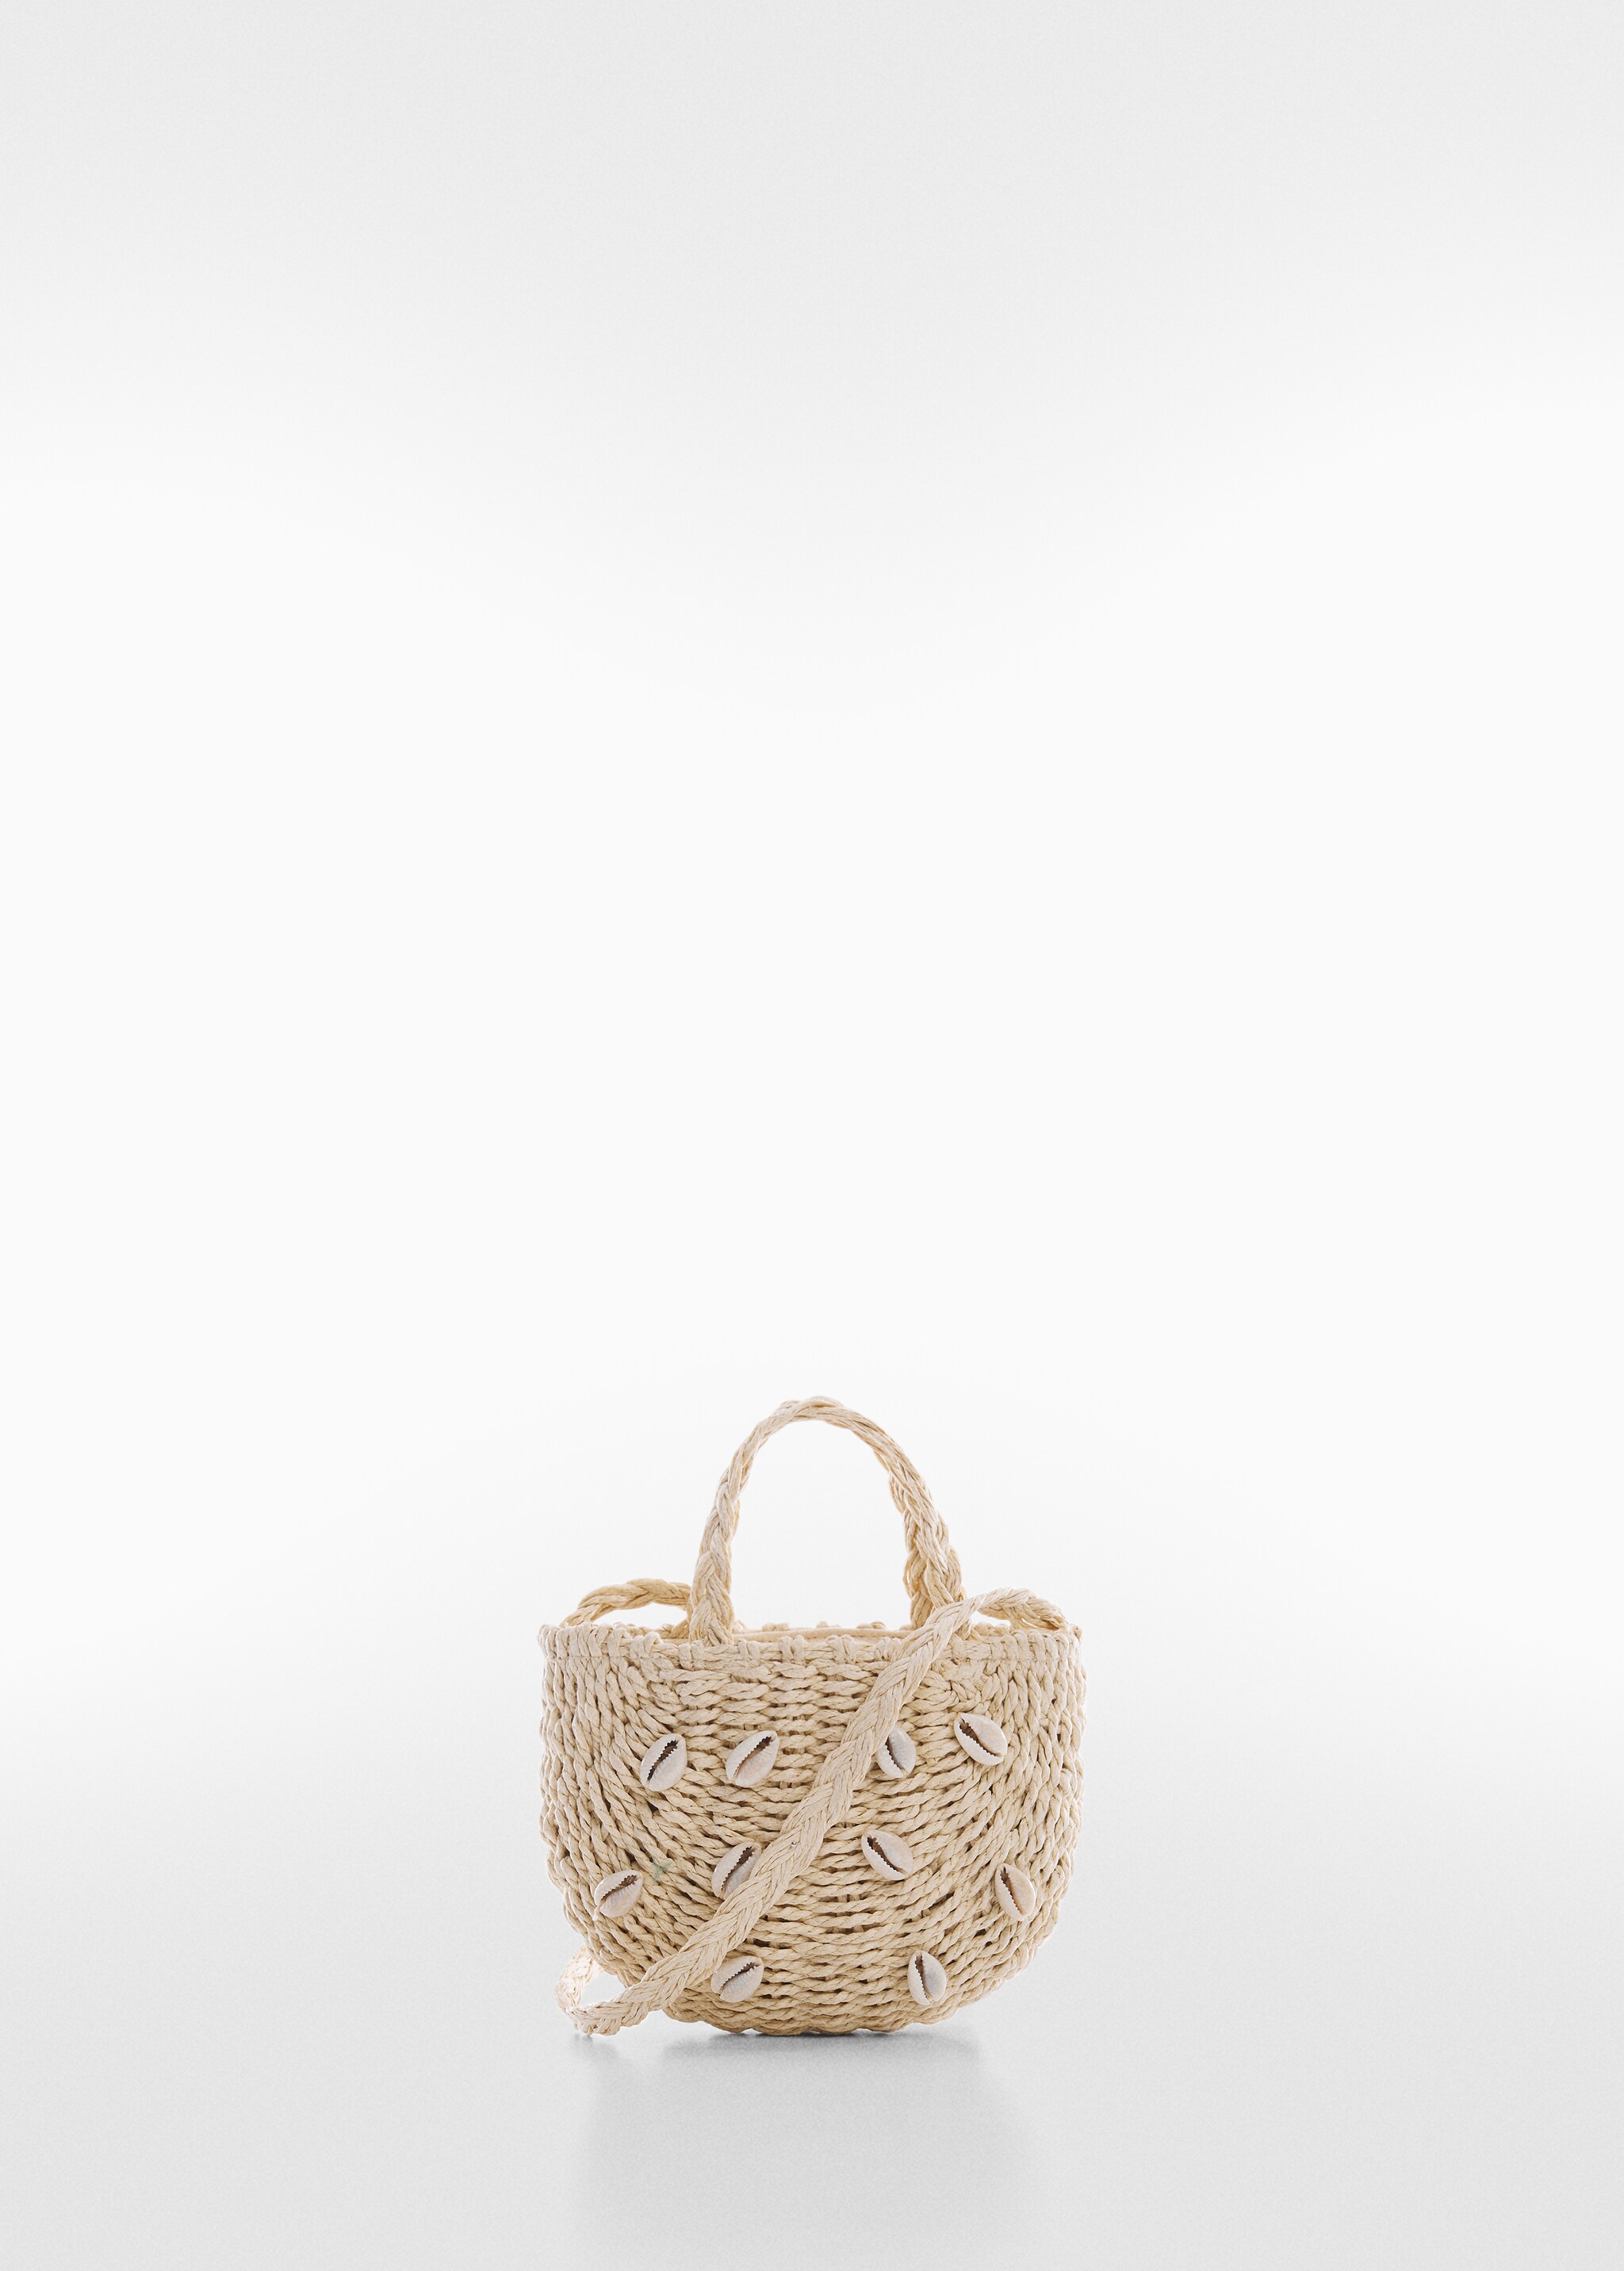 Straw bag - Article without model